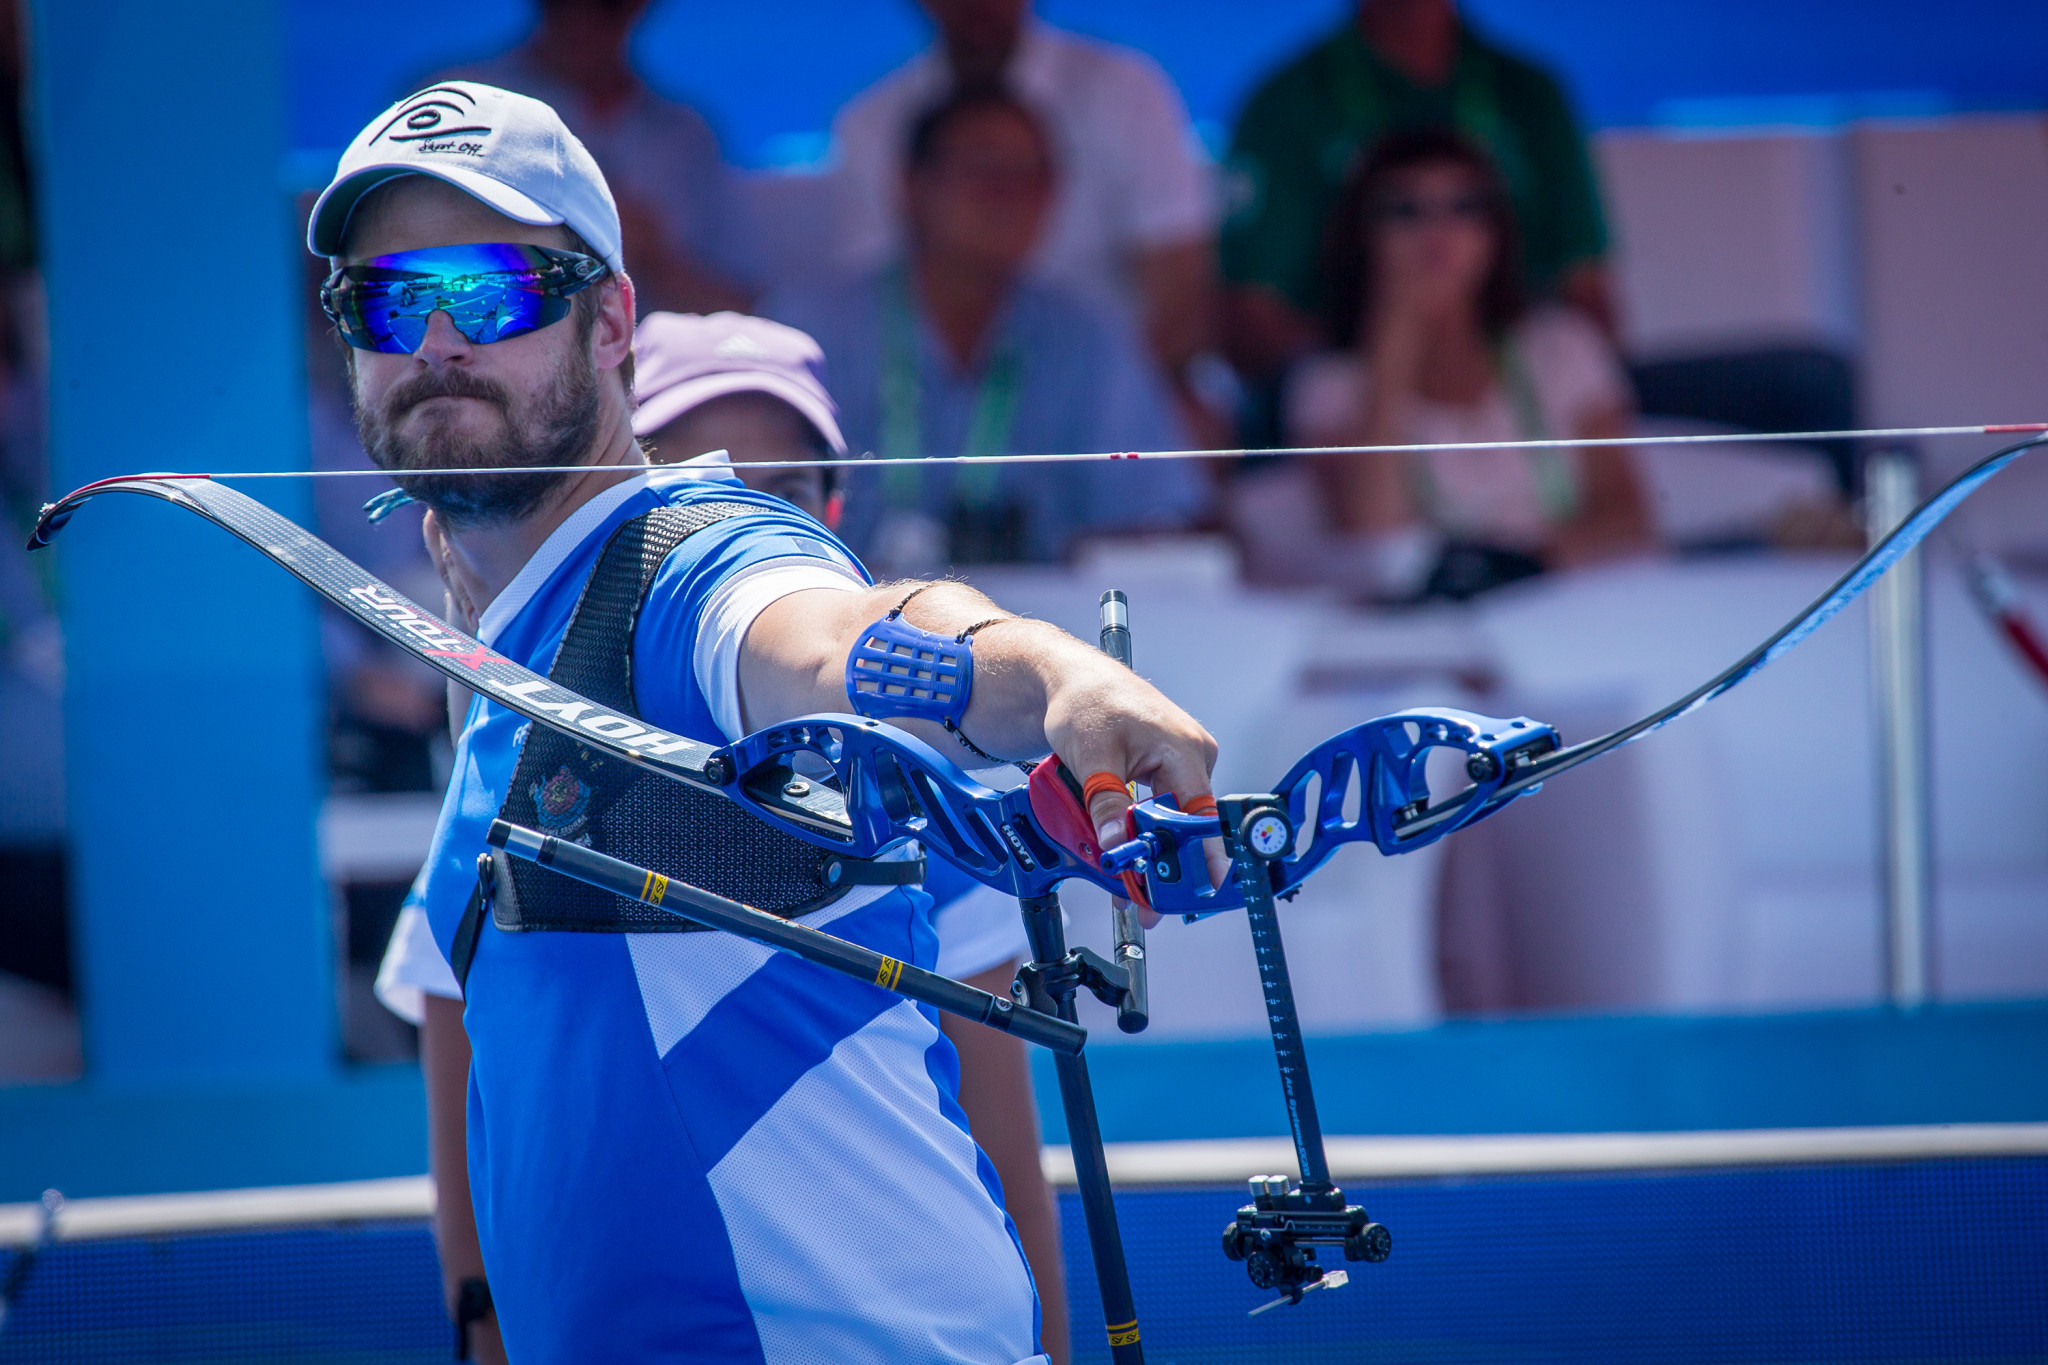 Jean-Charles Valladont of France collected a second medal in two days as the European Field Archery Championships concluded in Slovenia ©Getty Images